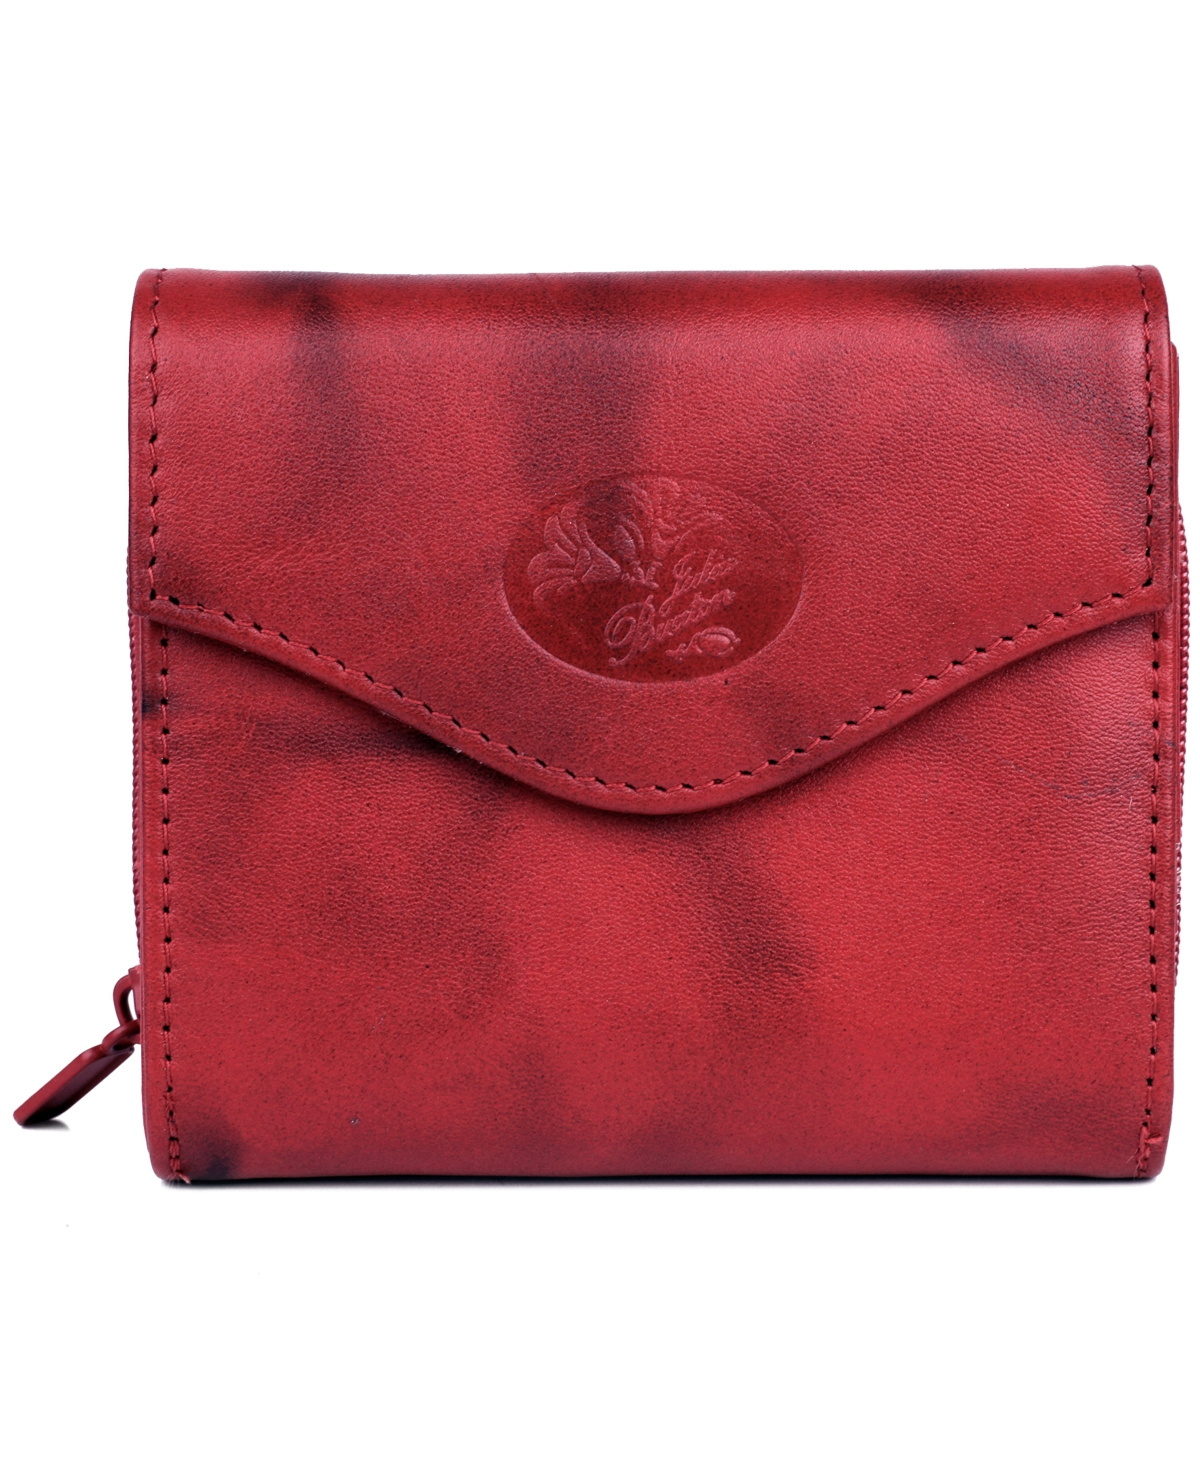 Women's Mini Heiress Zip French Purse - Red